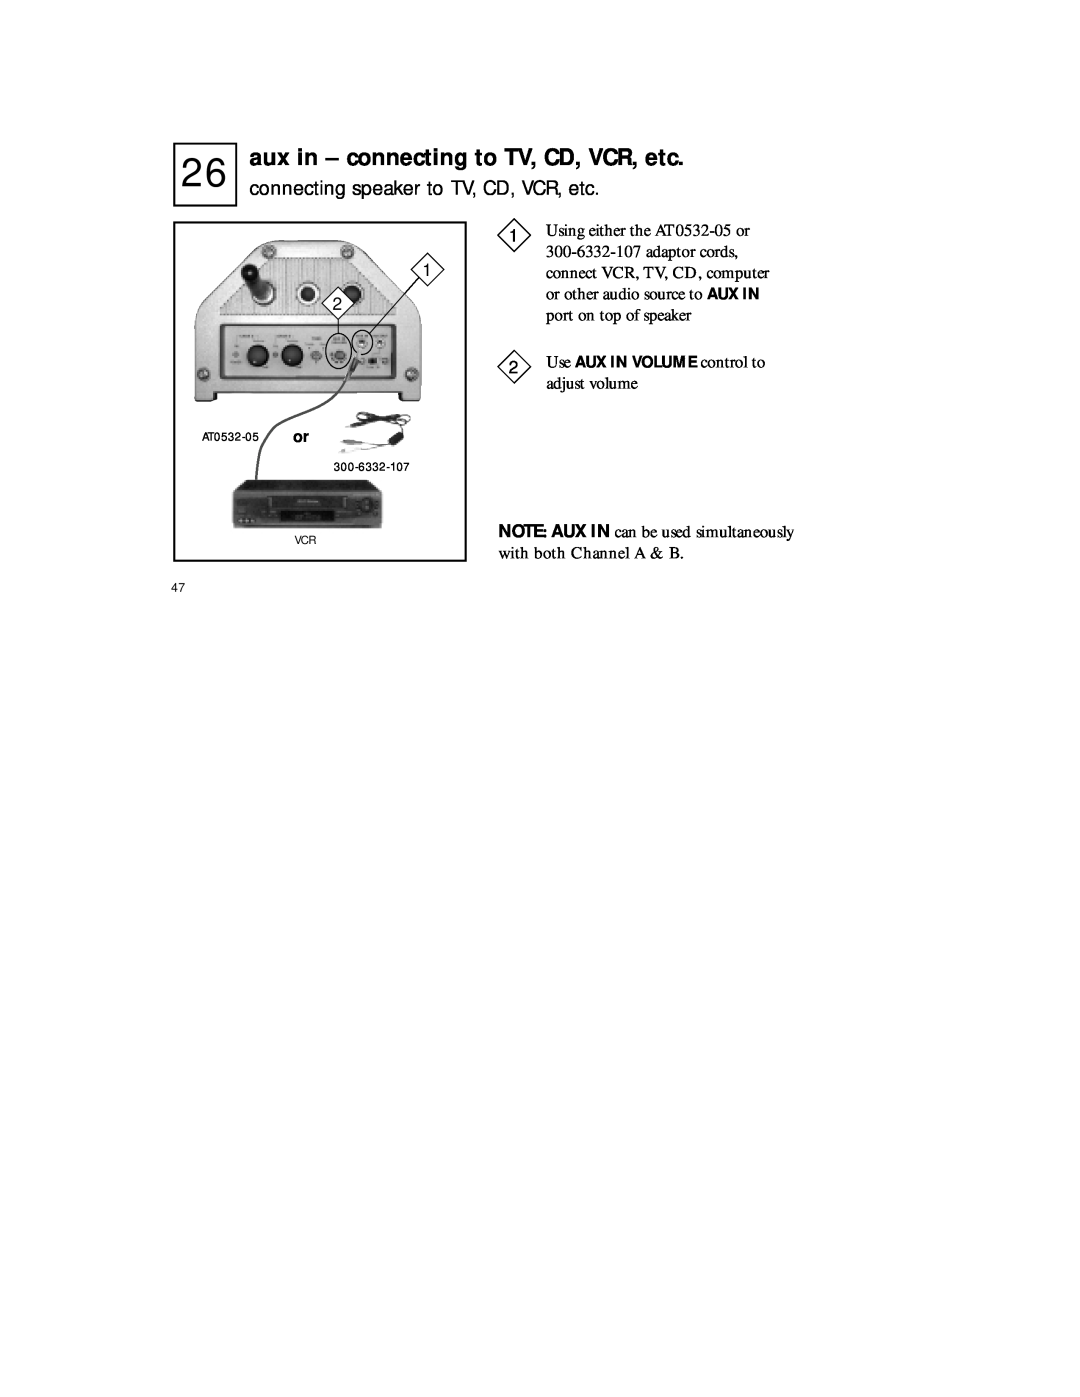 Radio Shack 920SR manual aux in - connecting to TV, CD, VCR, etc, connecting speaker to TV, CD, VCR, etc 